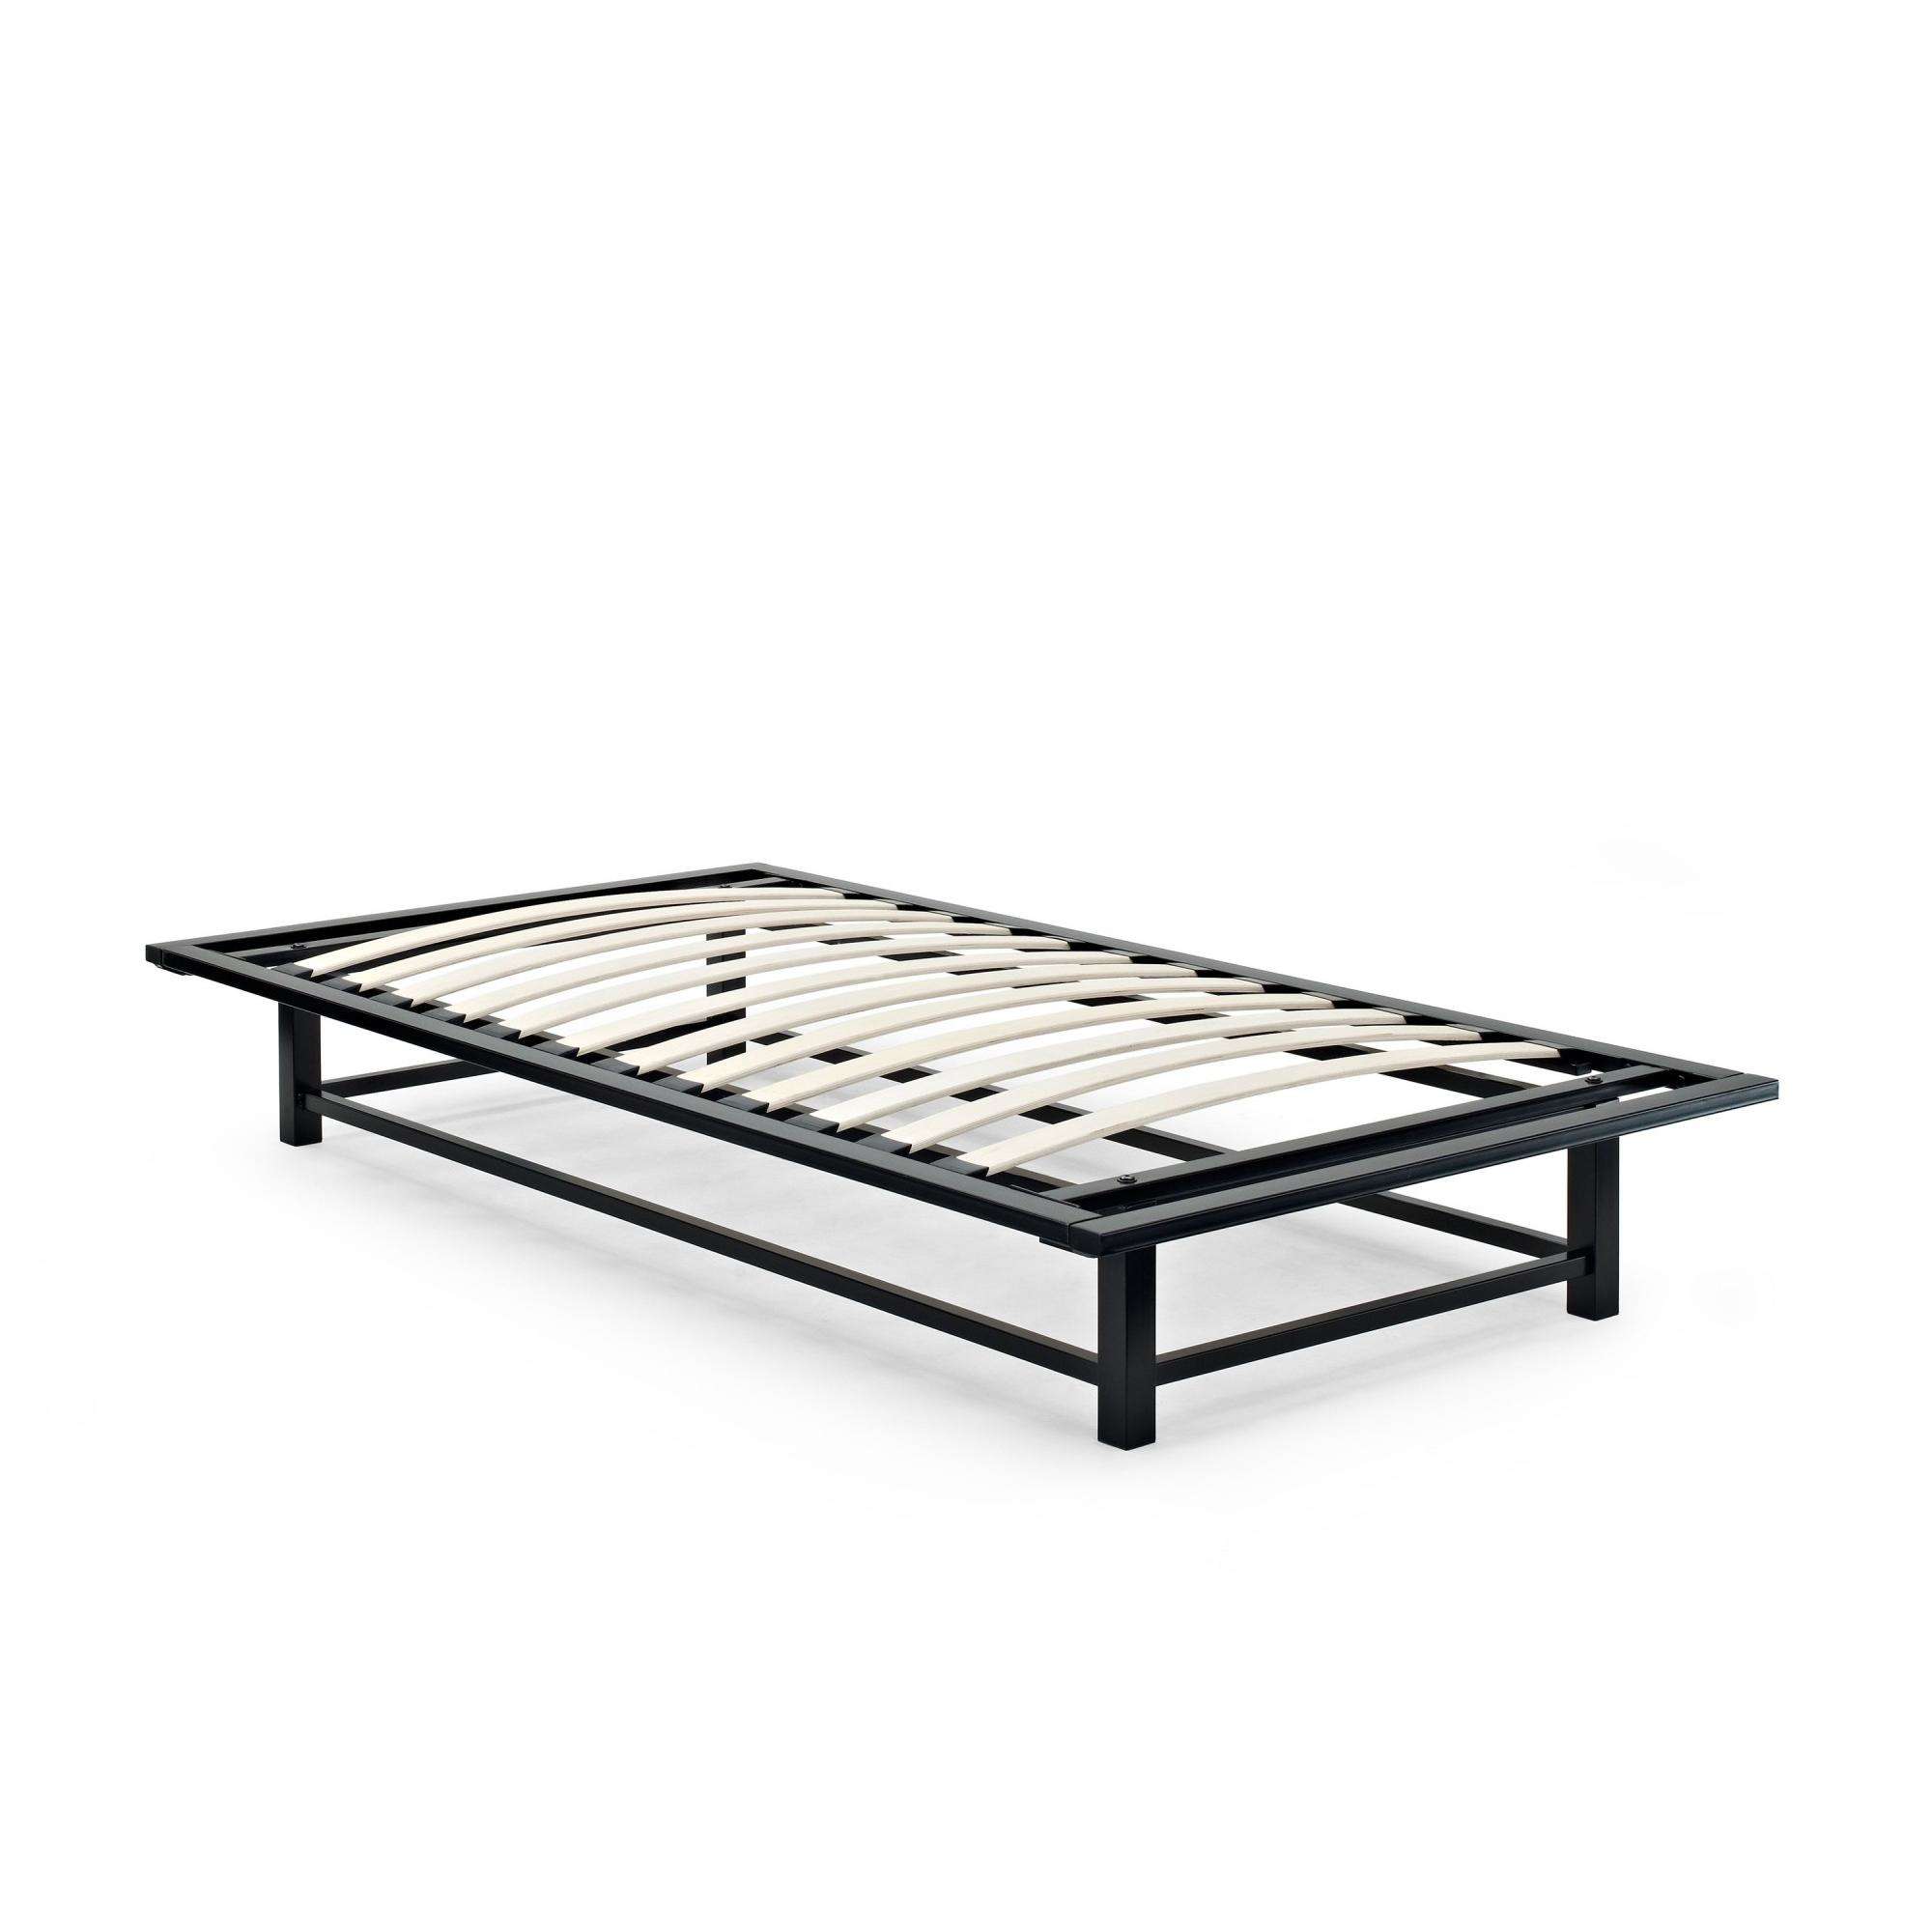 DHI Parsons Metal Ledge Platform Bed, Multiple Colors and Sizes - image 2 of 4